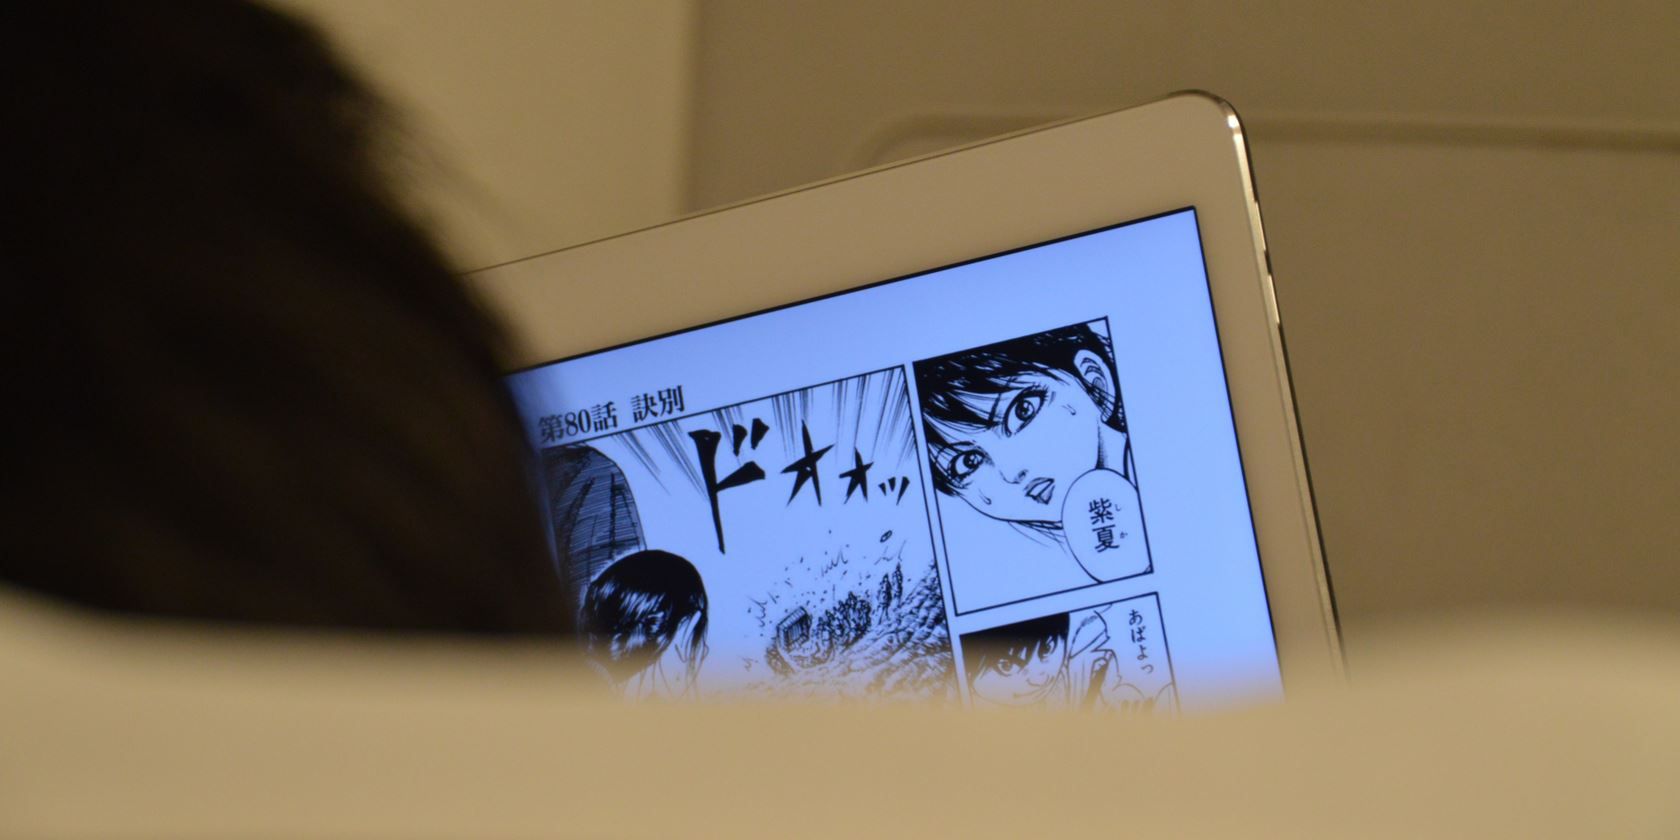 The 5 Best Legal Sites to Read Manga Online for Free